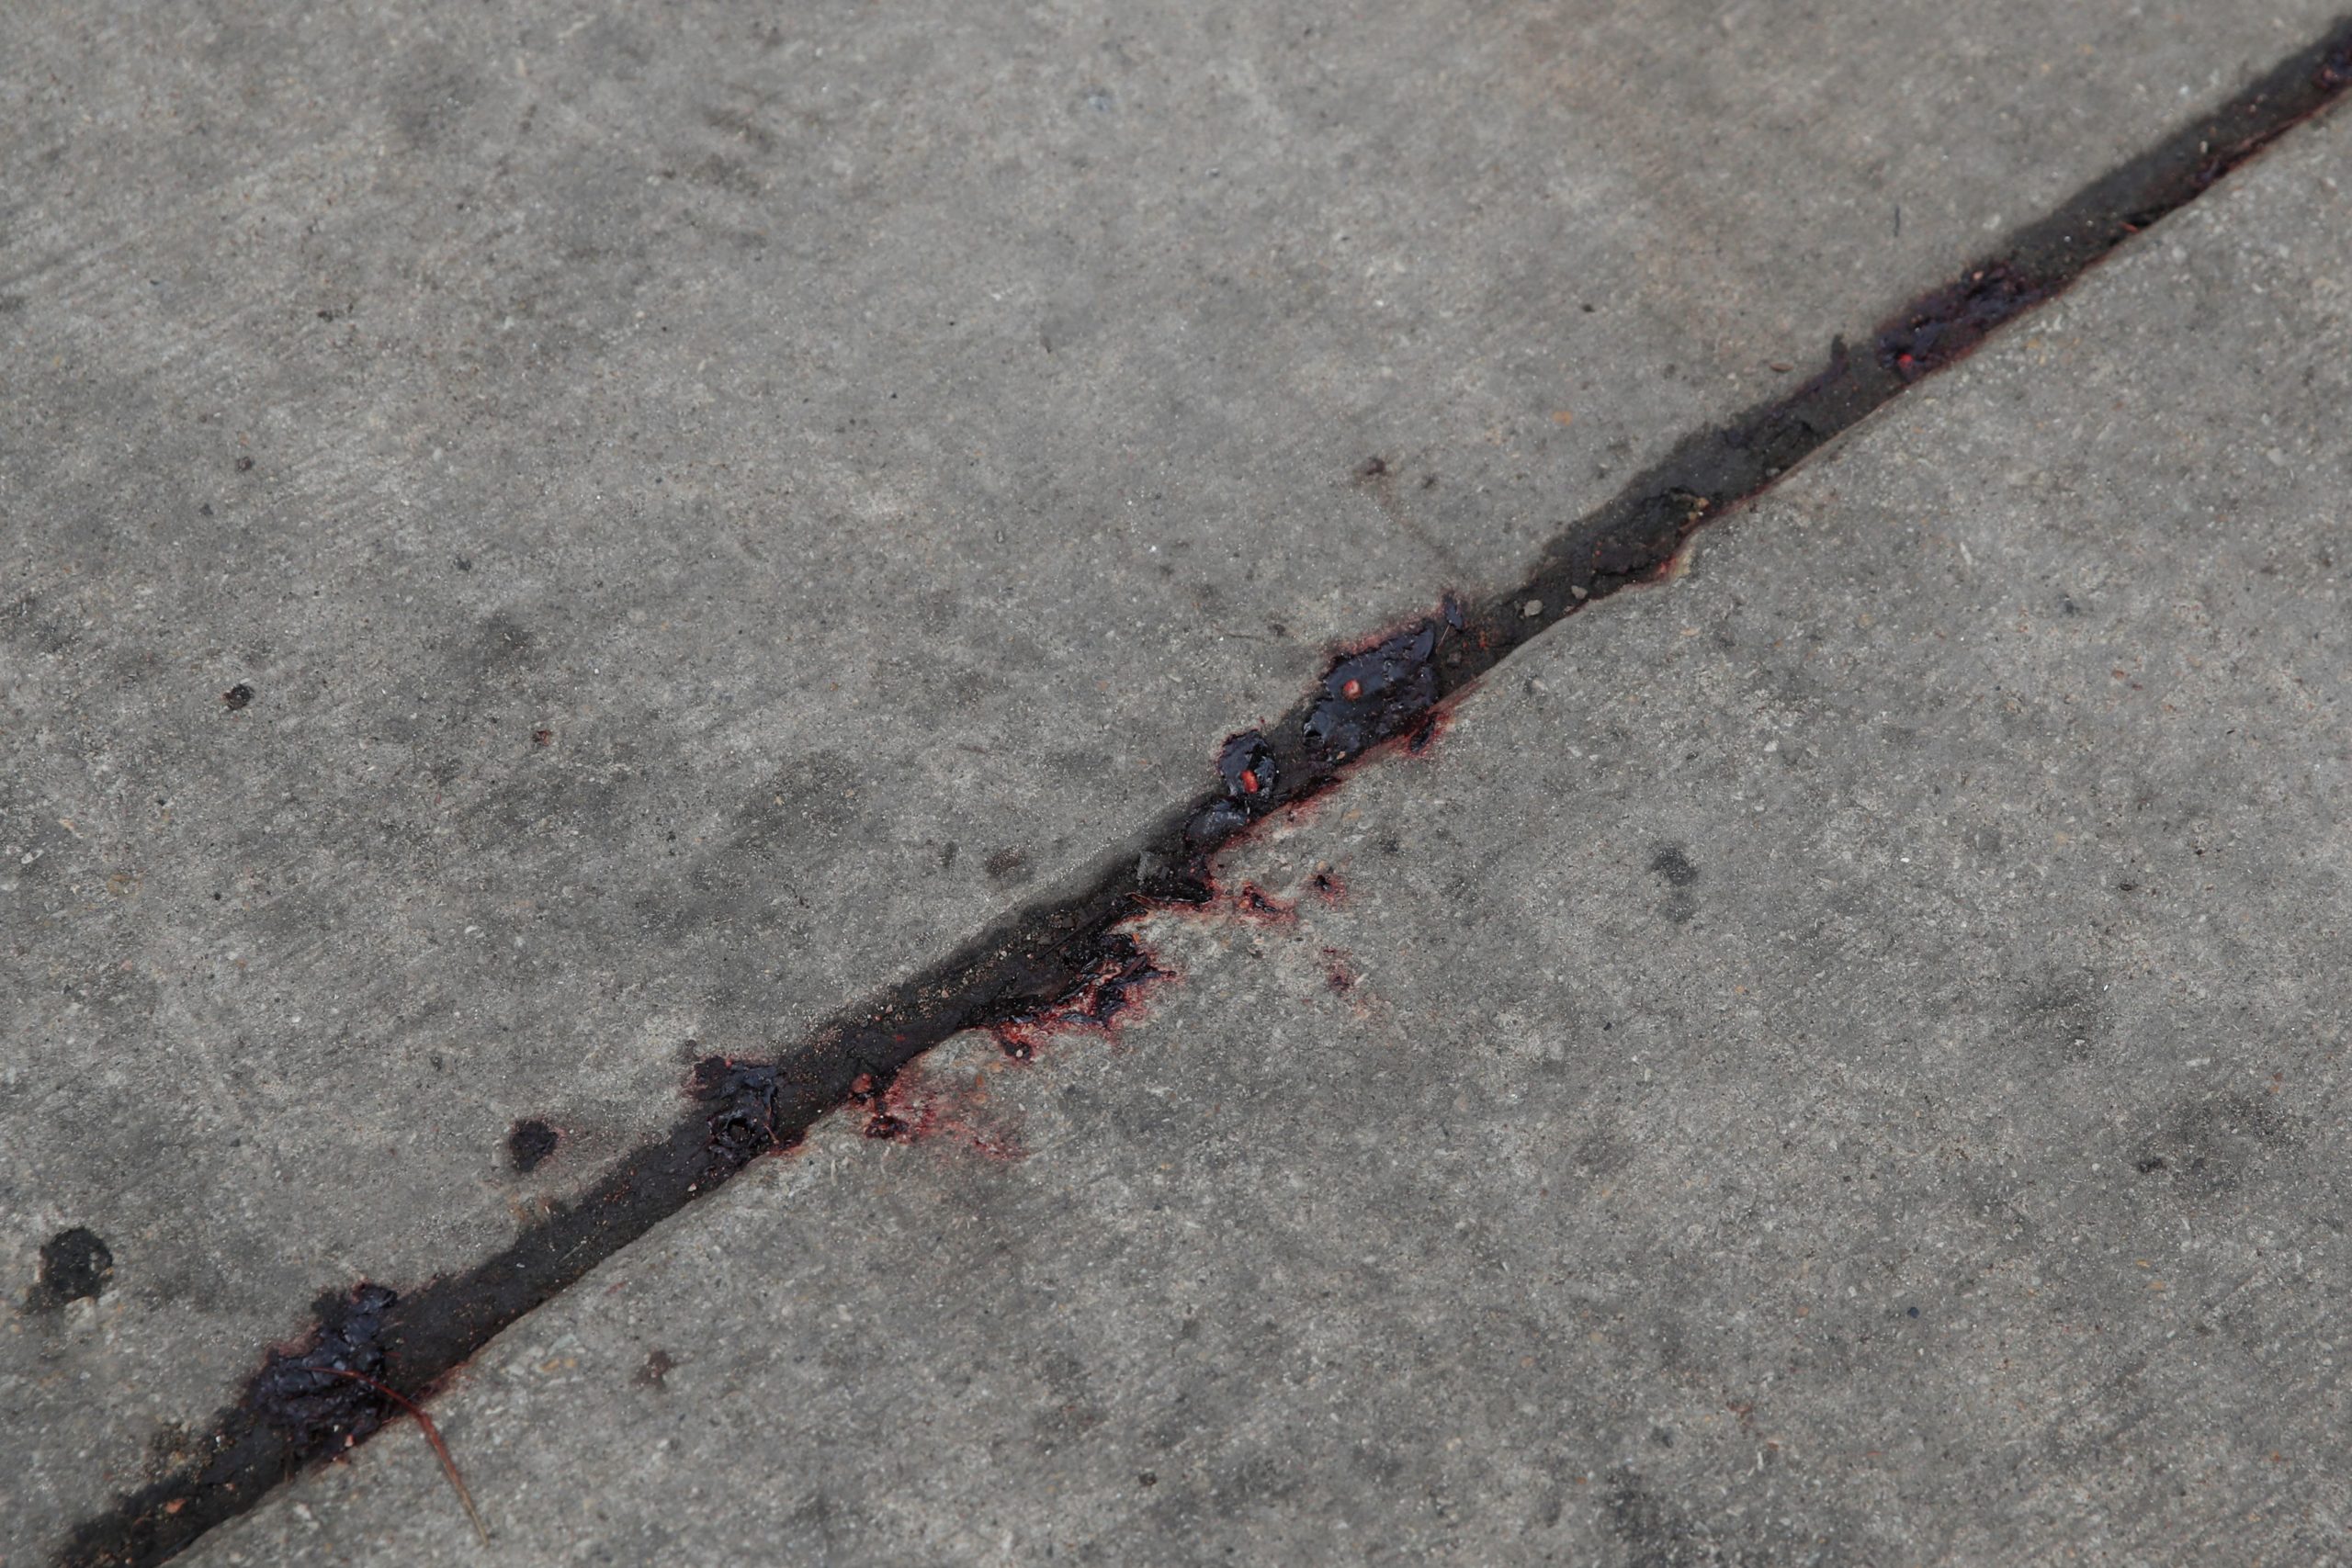 Blood is seen on the ground at the scene of a shooting in Chicago, Illinois, on March 14, 2021. - At least 15 people were shot, two of them fatally, after gunfire broke out at a South Chicago business where a party was being held early on March 14, 2021. (Photo by KAMIL KRZACZYNSKI / AFP) (Photo by KAMIL KRZACZYNSKI/AFP via Getty Images)